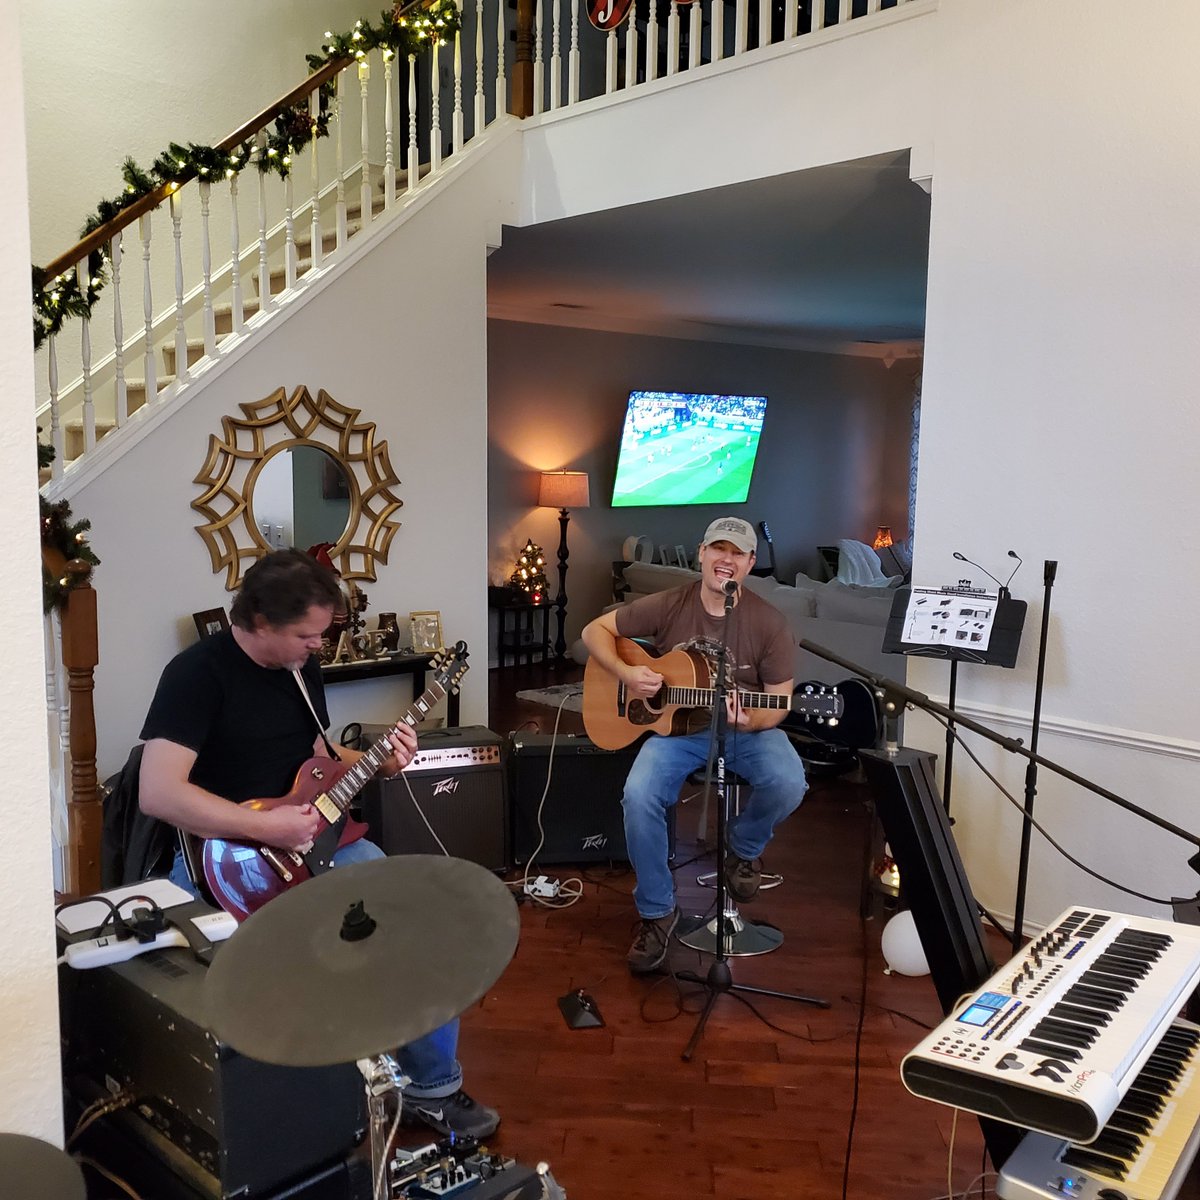 Pic from our Christmas practice.  Working on 30 year old songs.  #tbbynho #dadrock #newclassicrock🎄🎄🎄🎄🎄